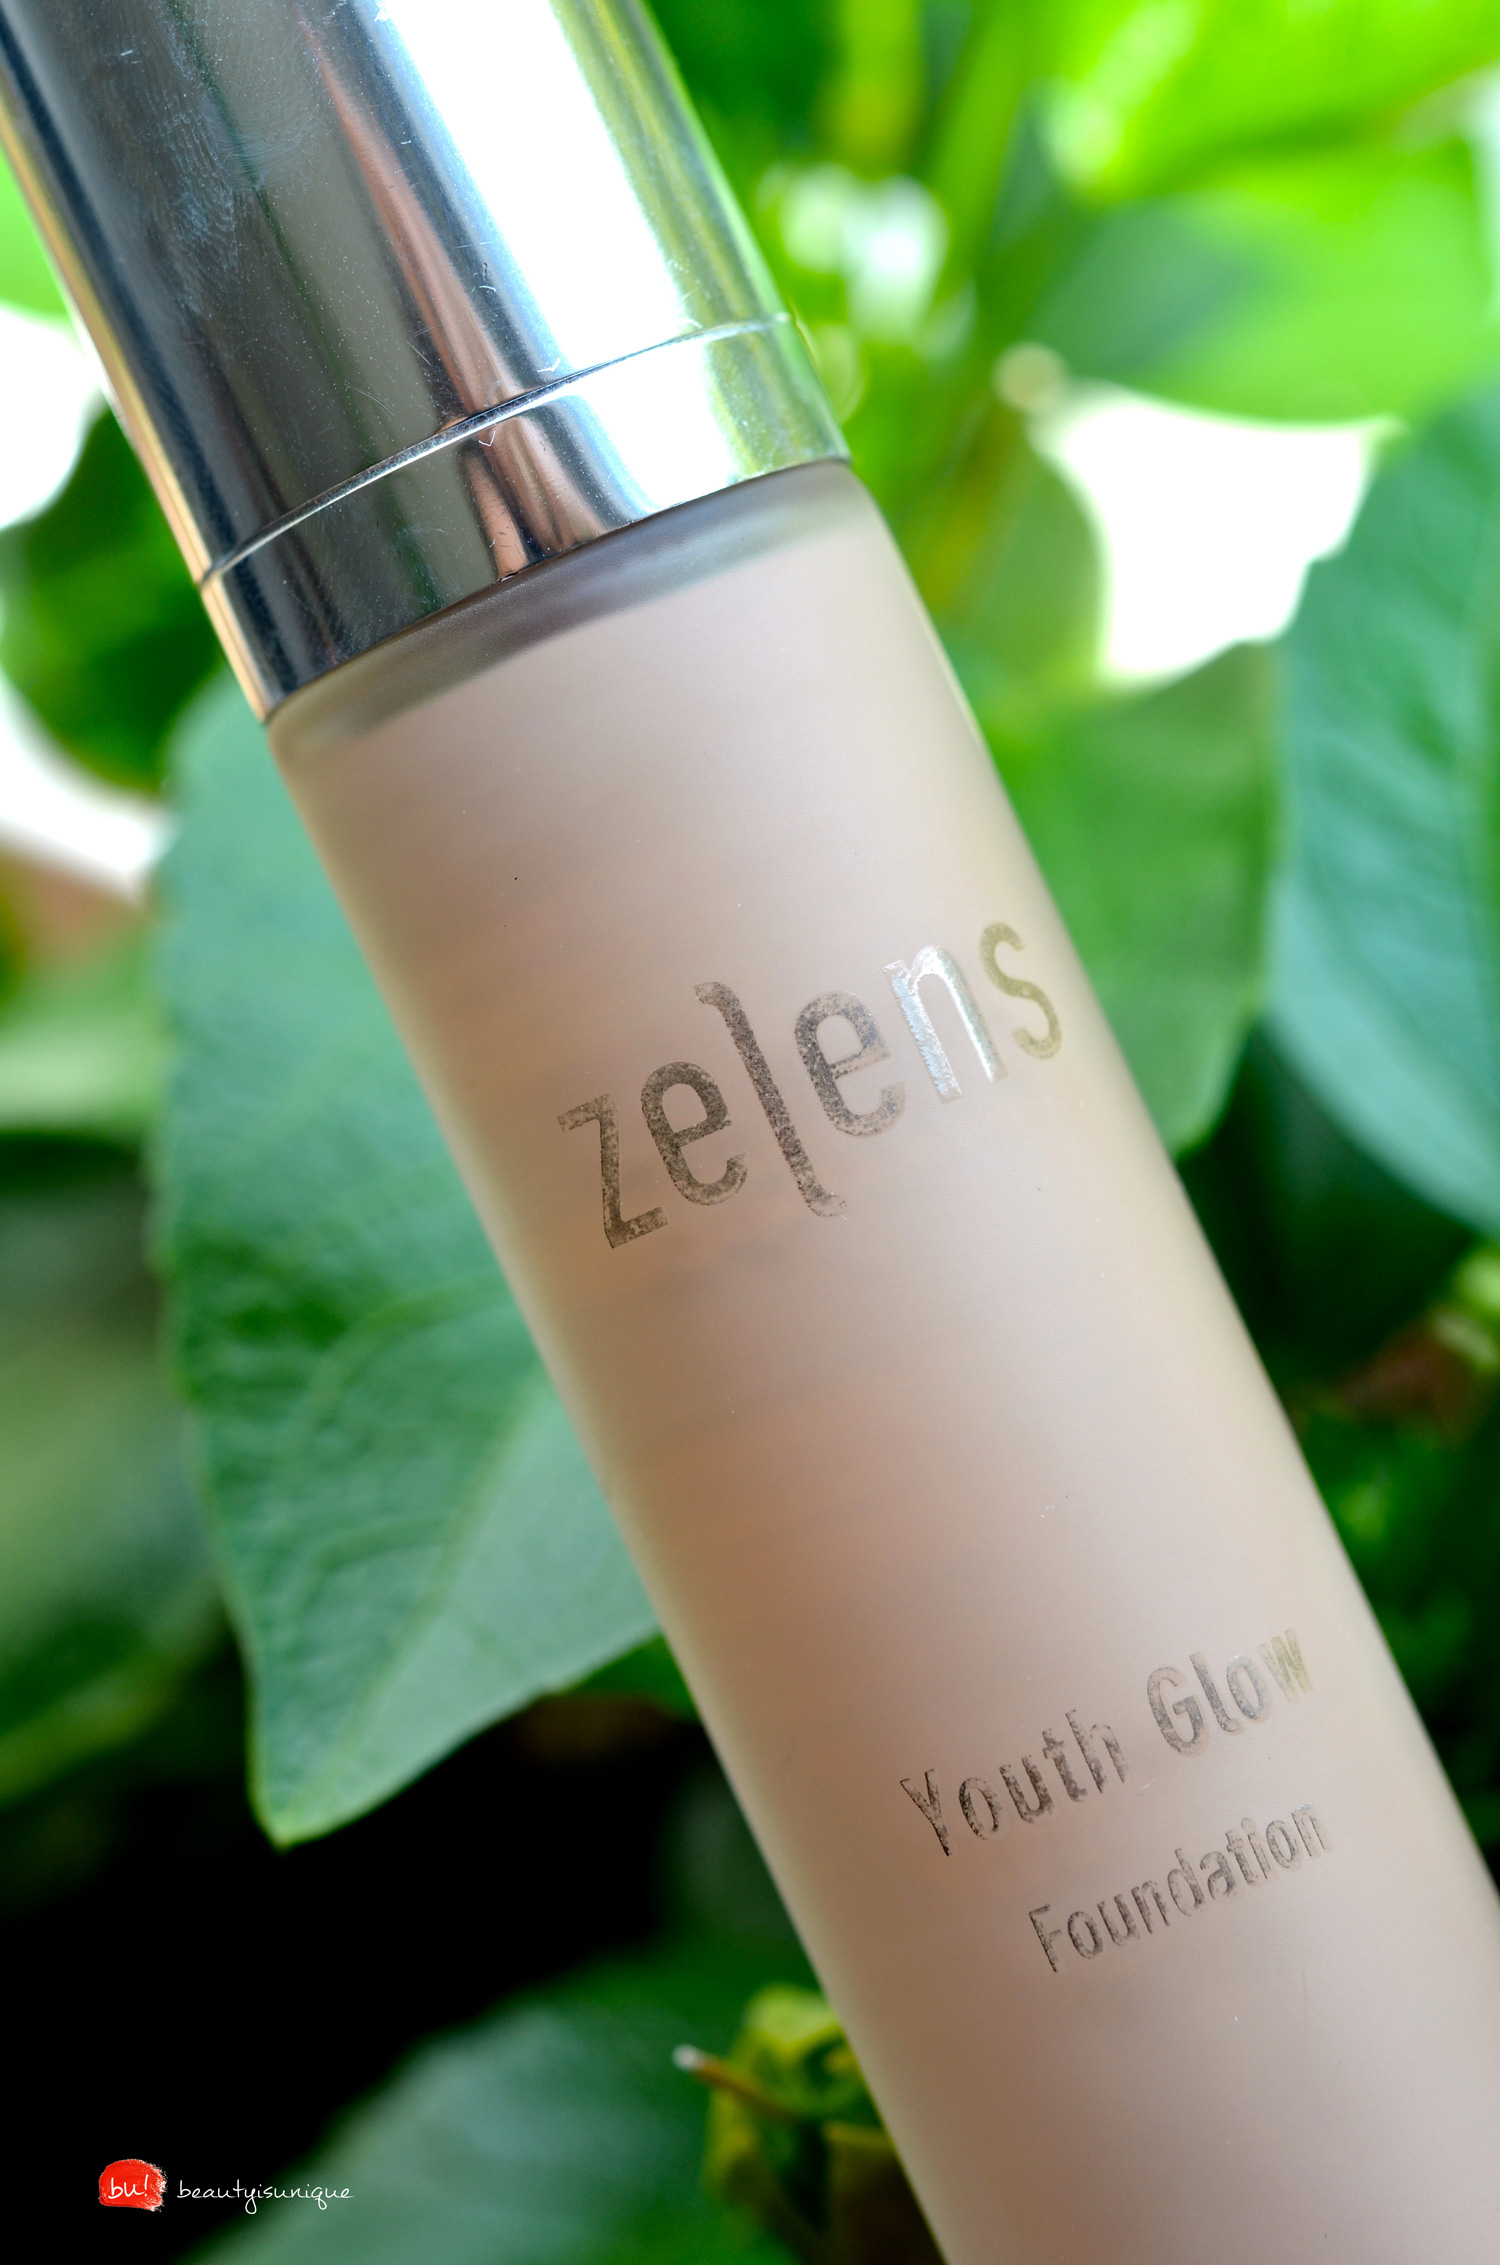 Zelens-youth-.glow-foundation